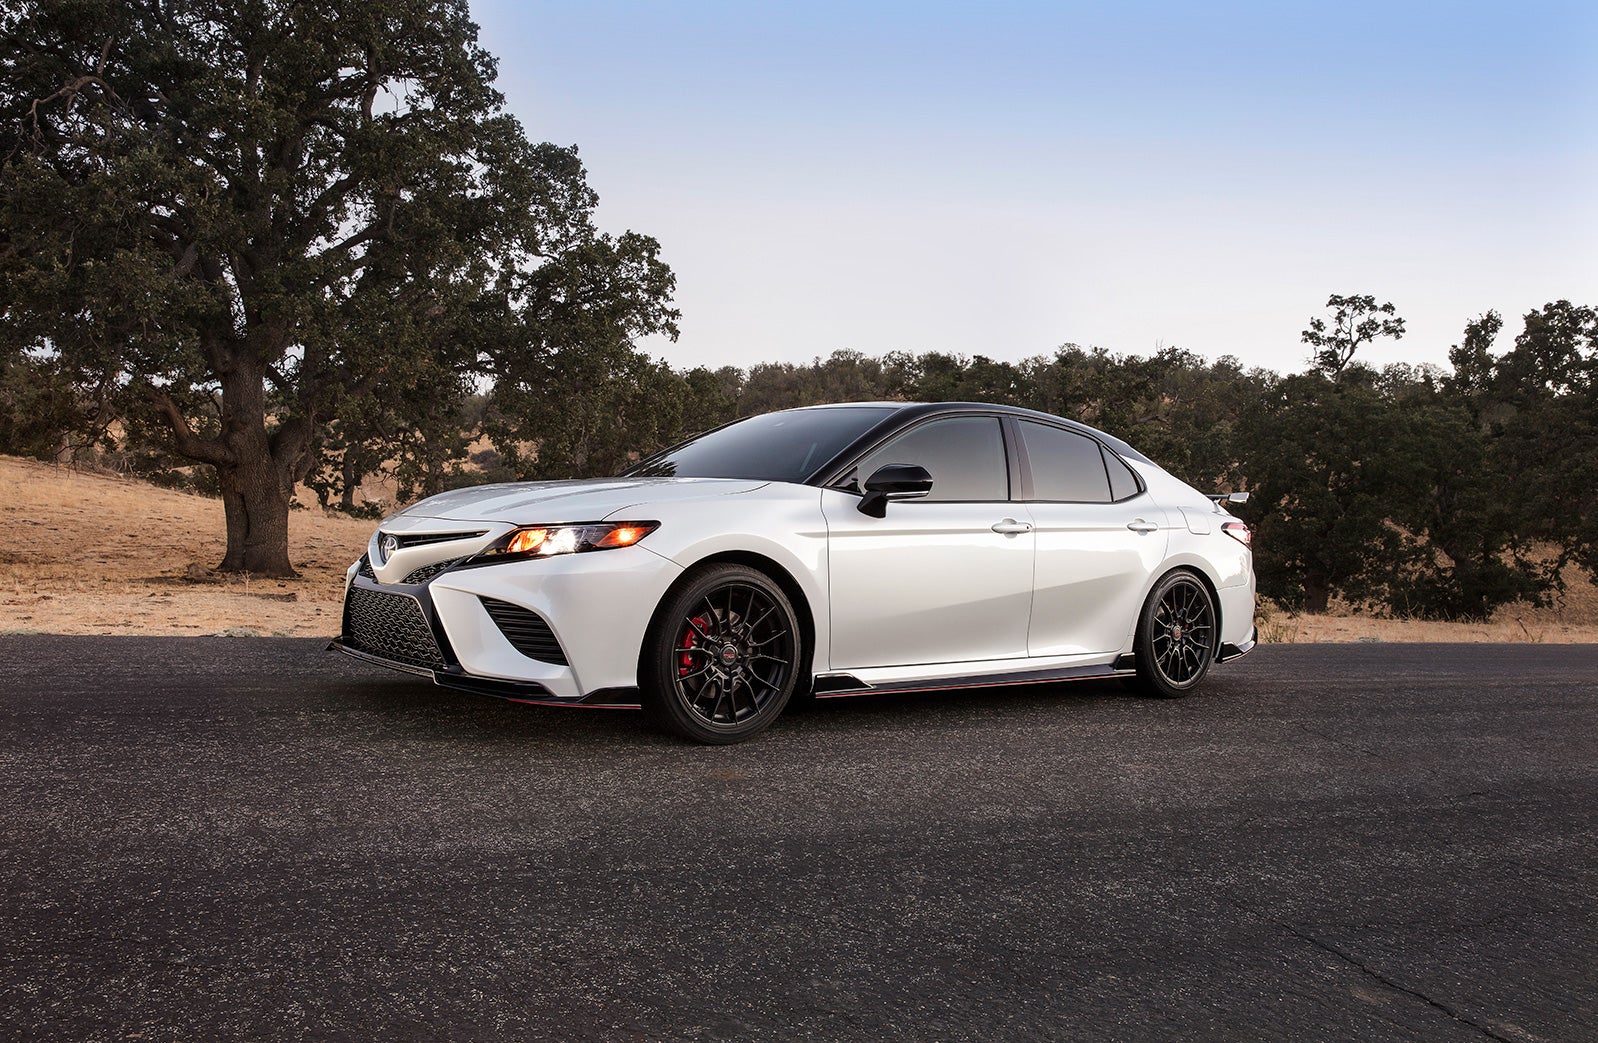 2020 Toyota Camry versus 2020 Honda Accord Comparison at Fiore Toyota | White 2020 Camry parked on road